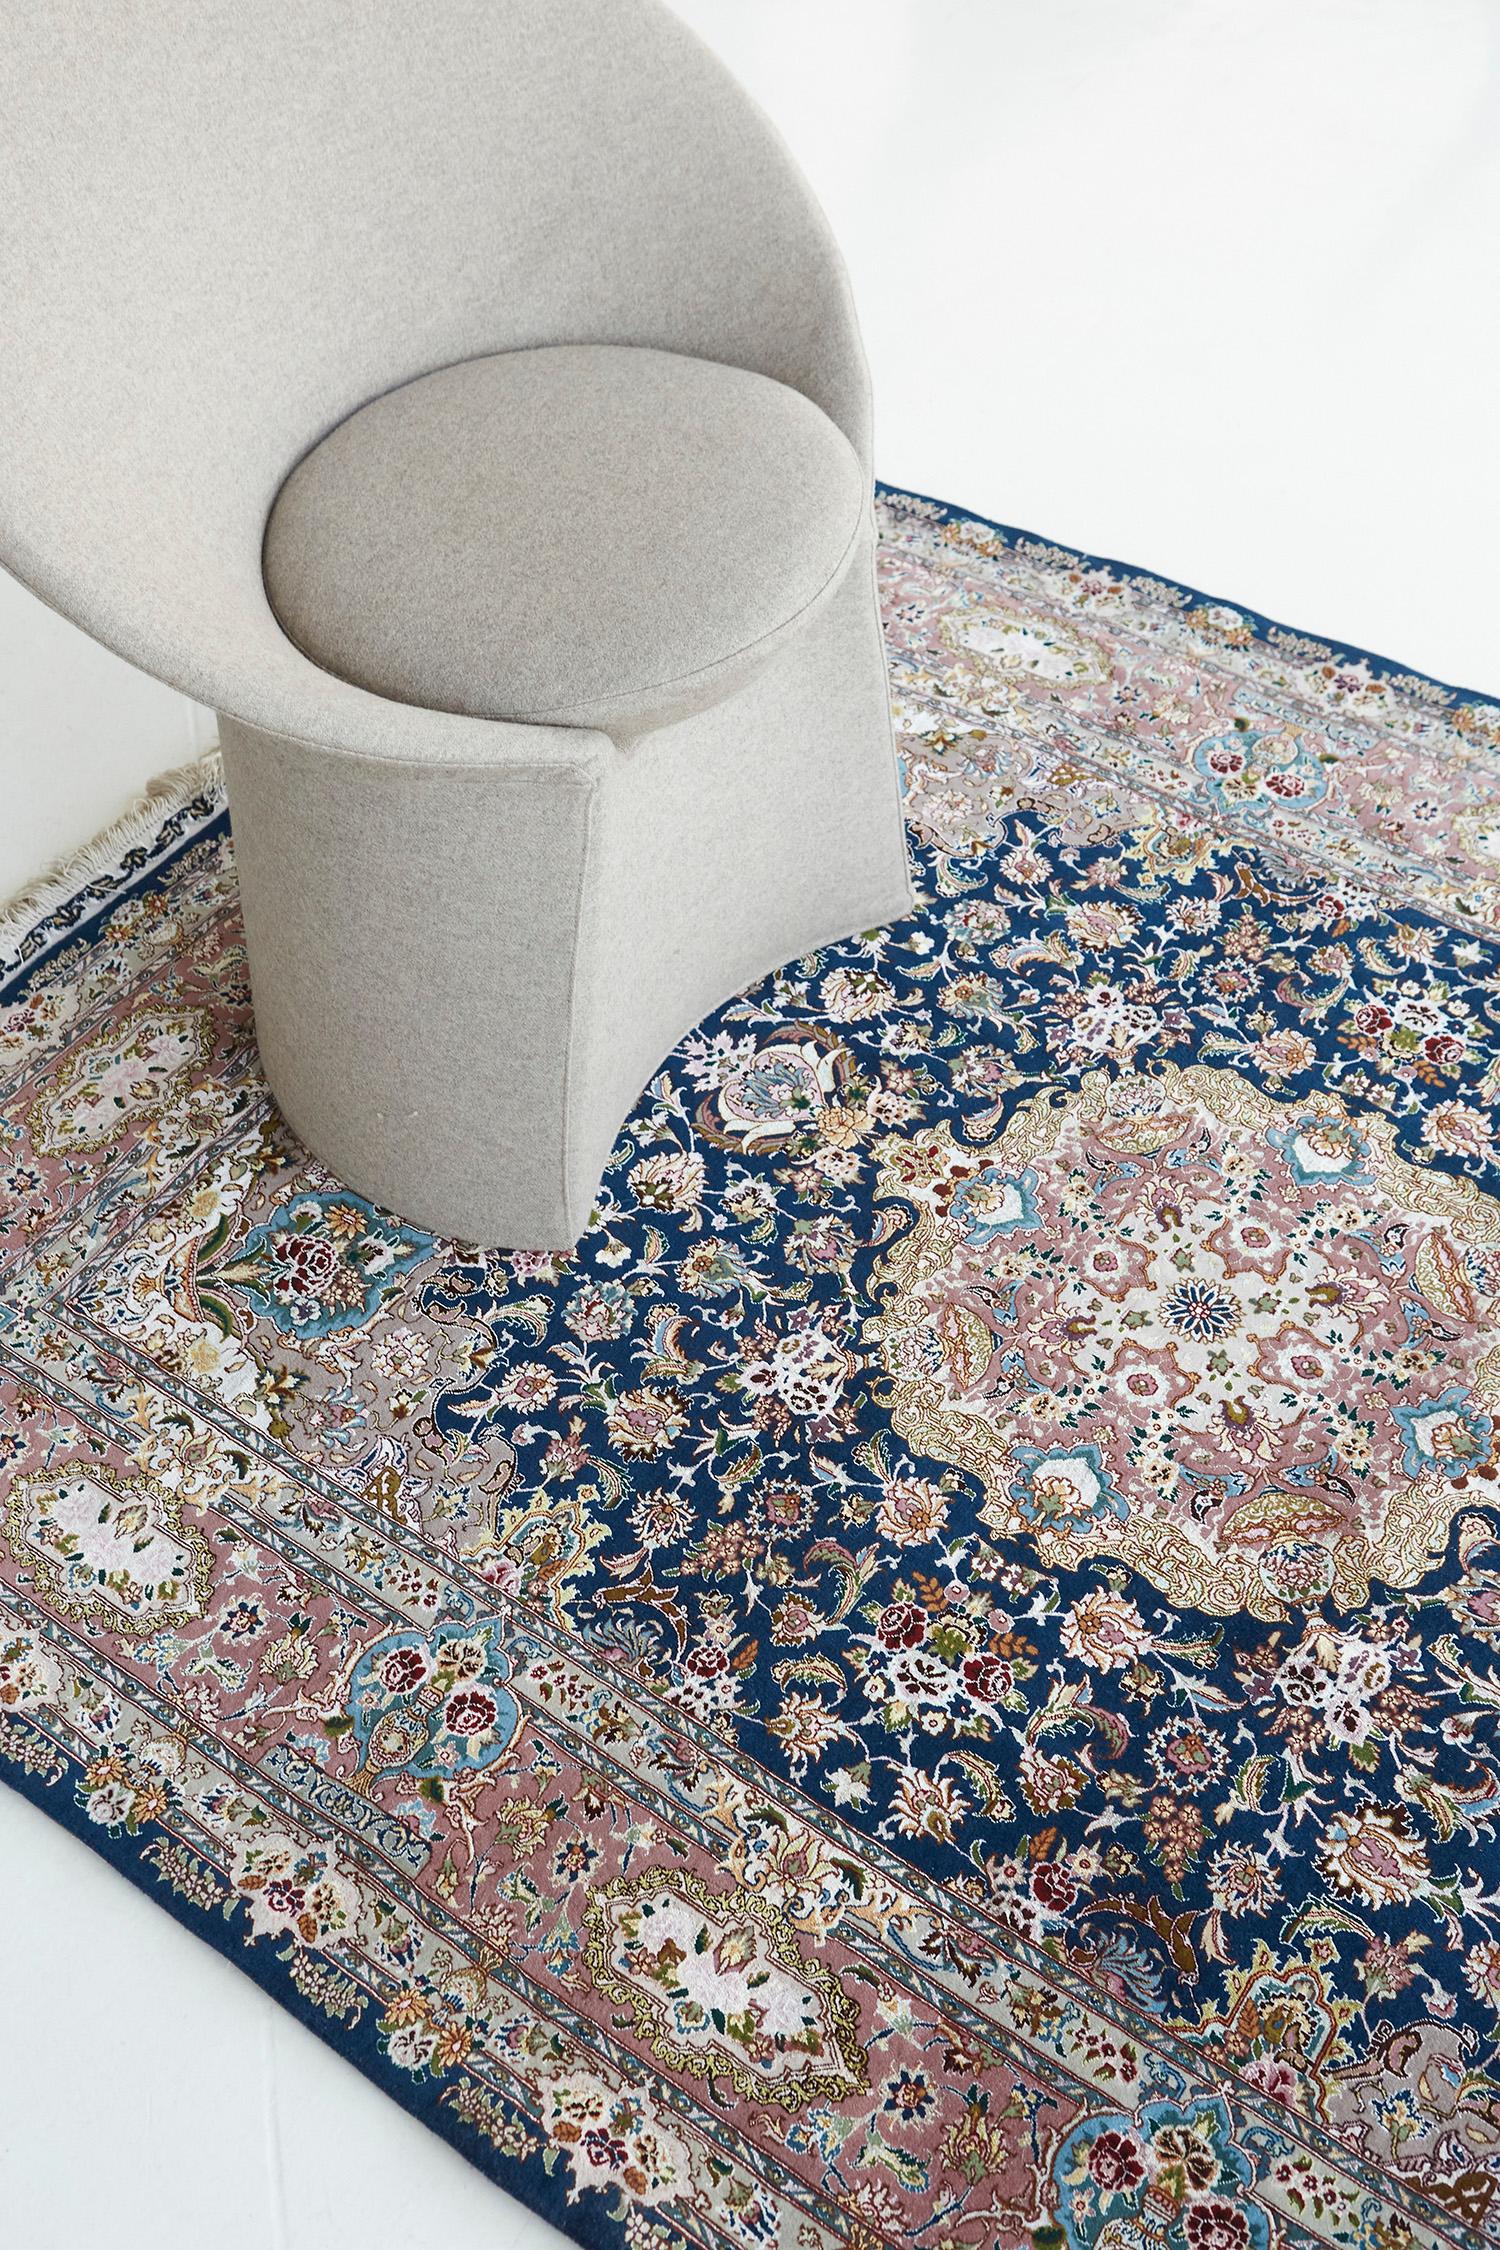 A laudable Fine Persian Tabriz rug features all the blooming elements that intensify into a midnight blue field. The main border contains an all-over lattice of issuing split leaves, mini palmettes, and a delicate flowering vinery that makes the rug